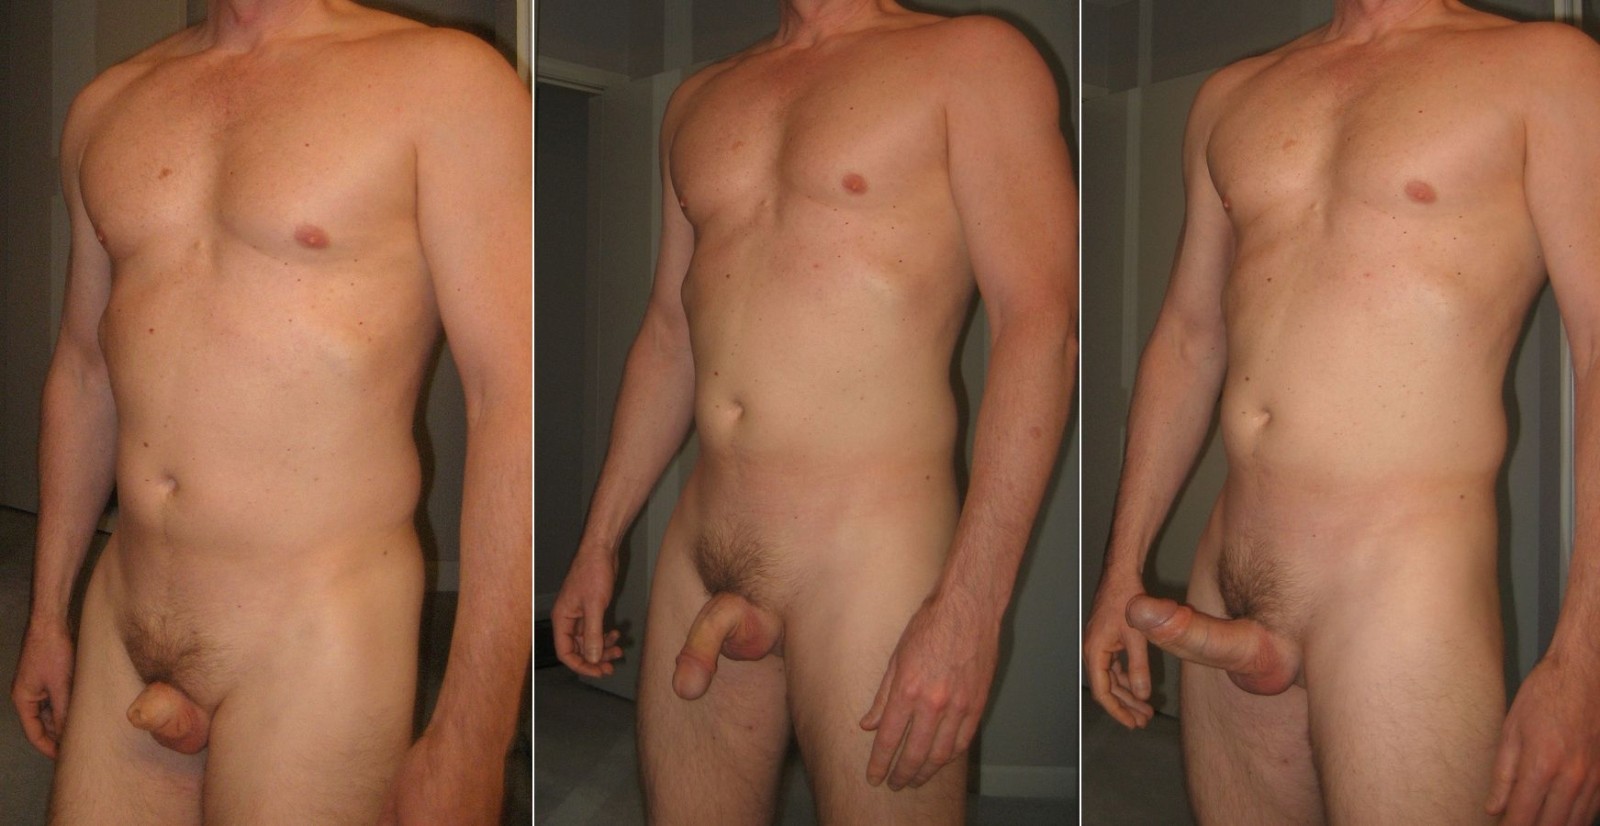 Genitals male shaved